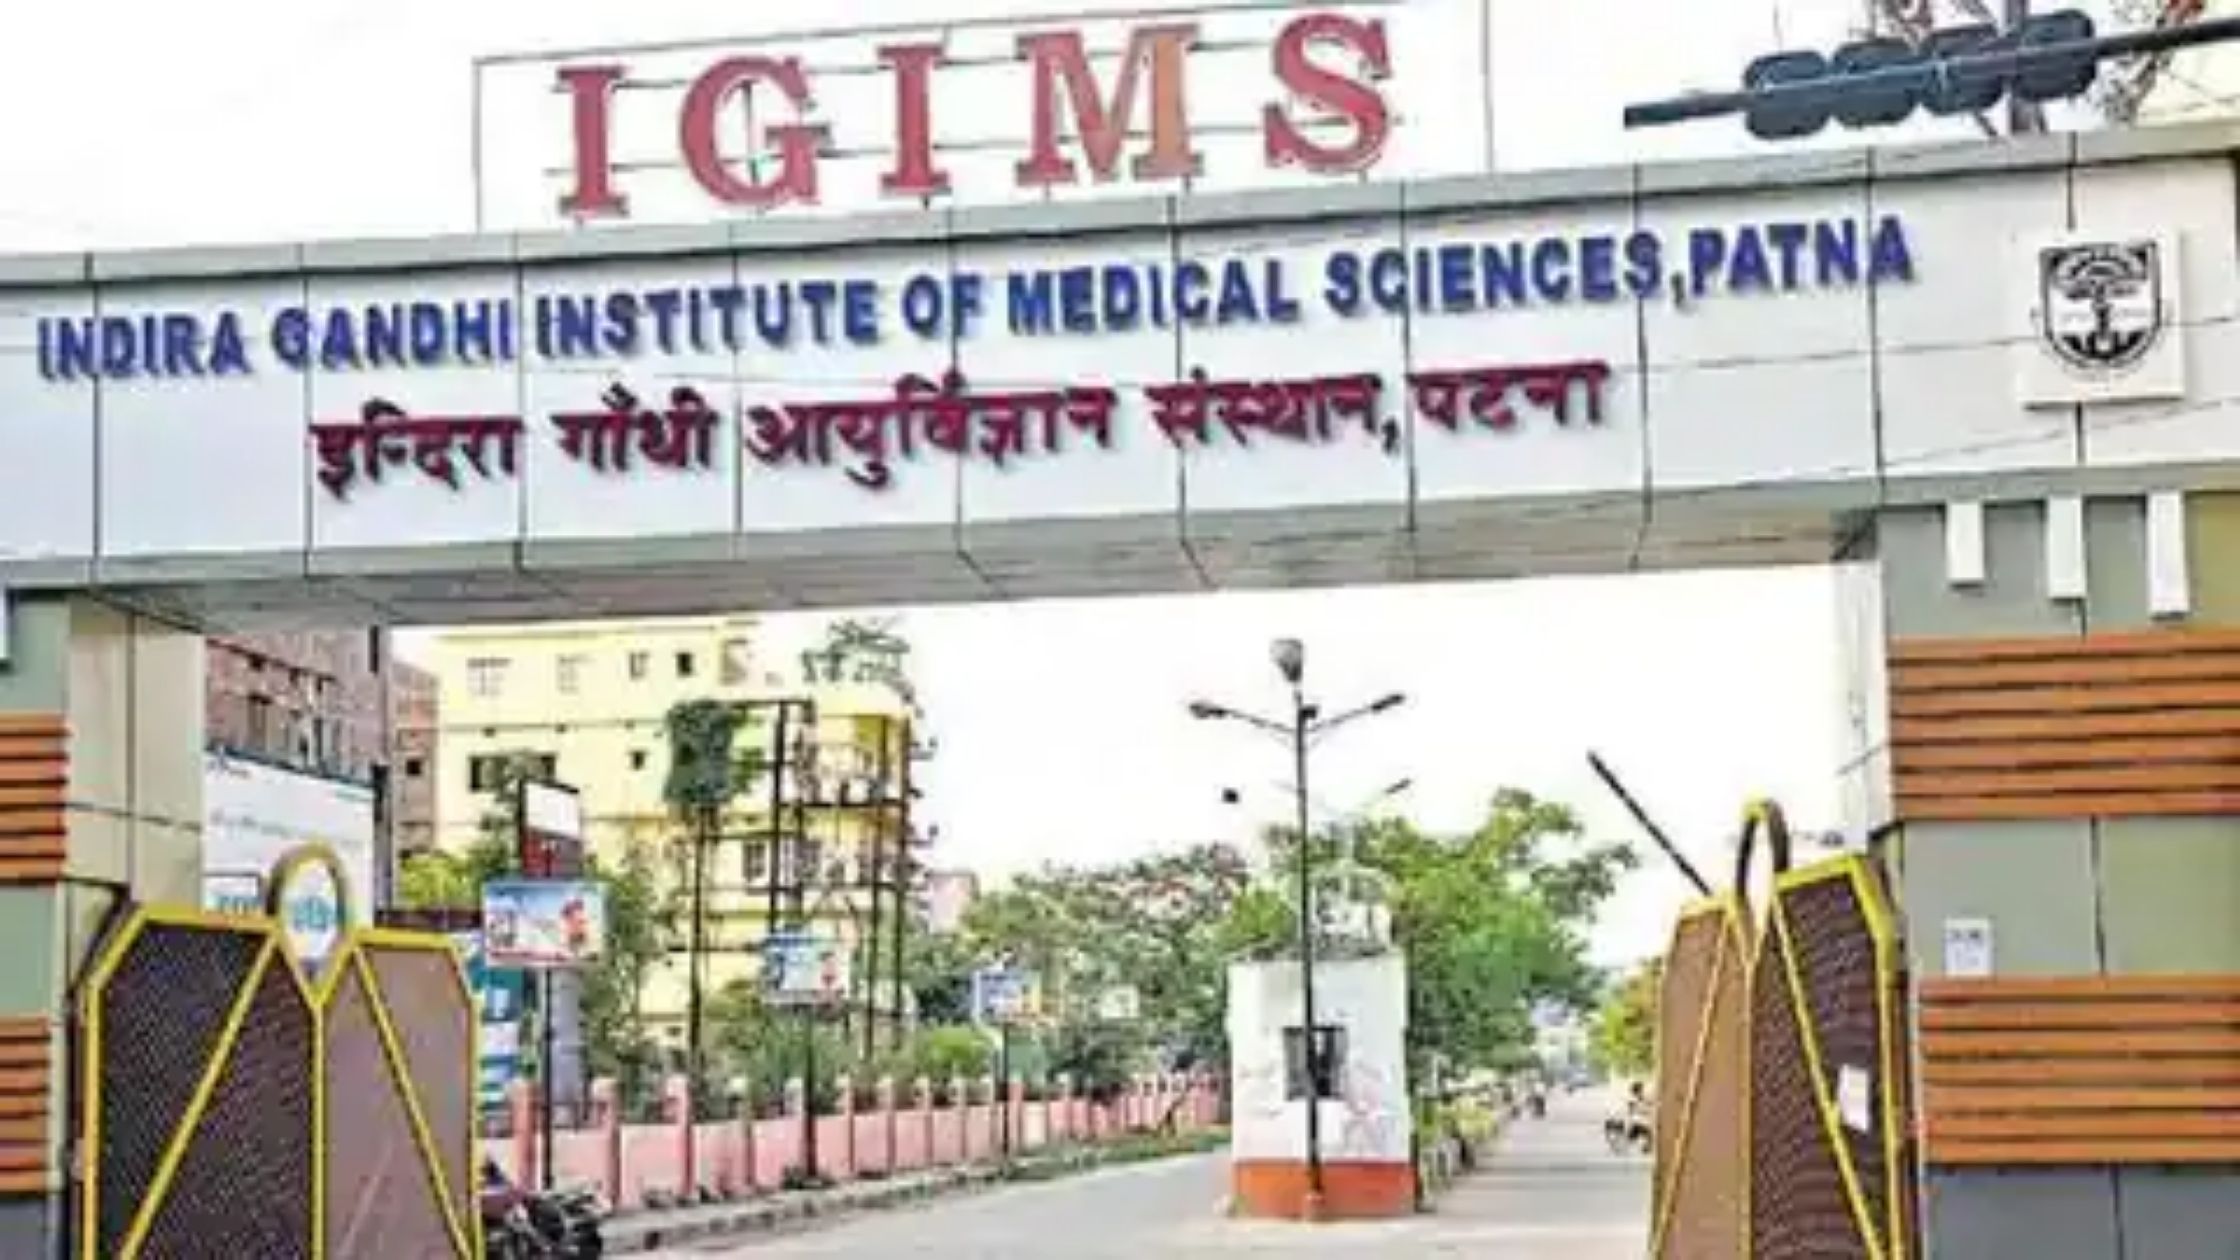 Free Treatment Of Serious Diseases In Patna Igims